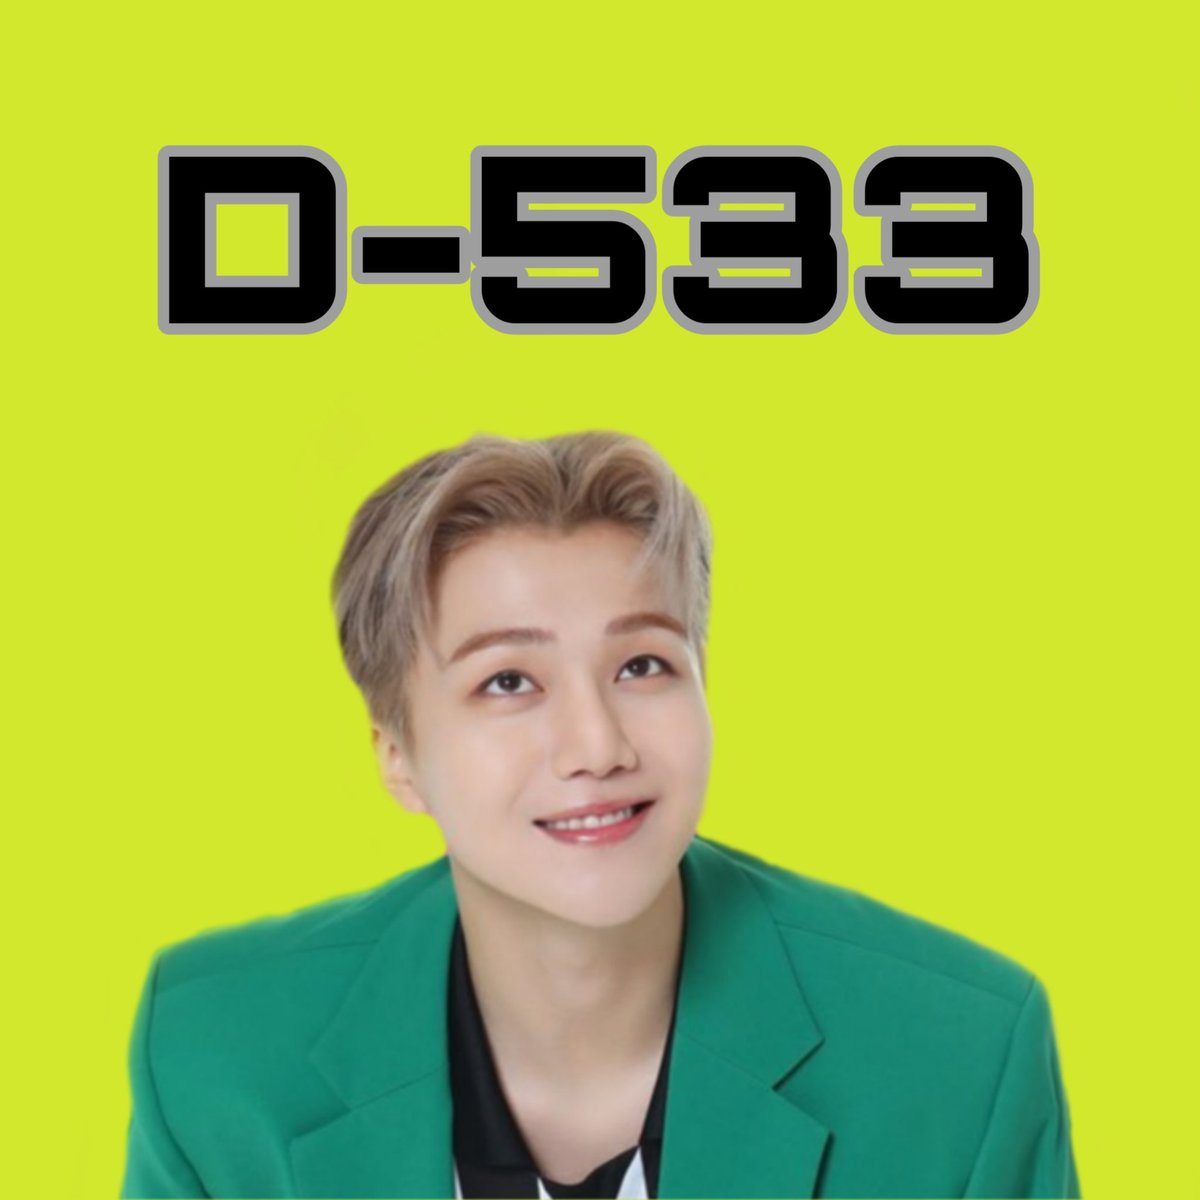 D-533- Jinhoya congratulations for putting your gas mask in 10seconds!! As expected from our eldest  keep working hard jinho you can do it!! And we'll send you more letters i love you  #Pentagon  #Jinho  #펜타곤  #진호  @CUBE_PTG